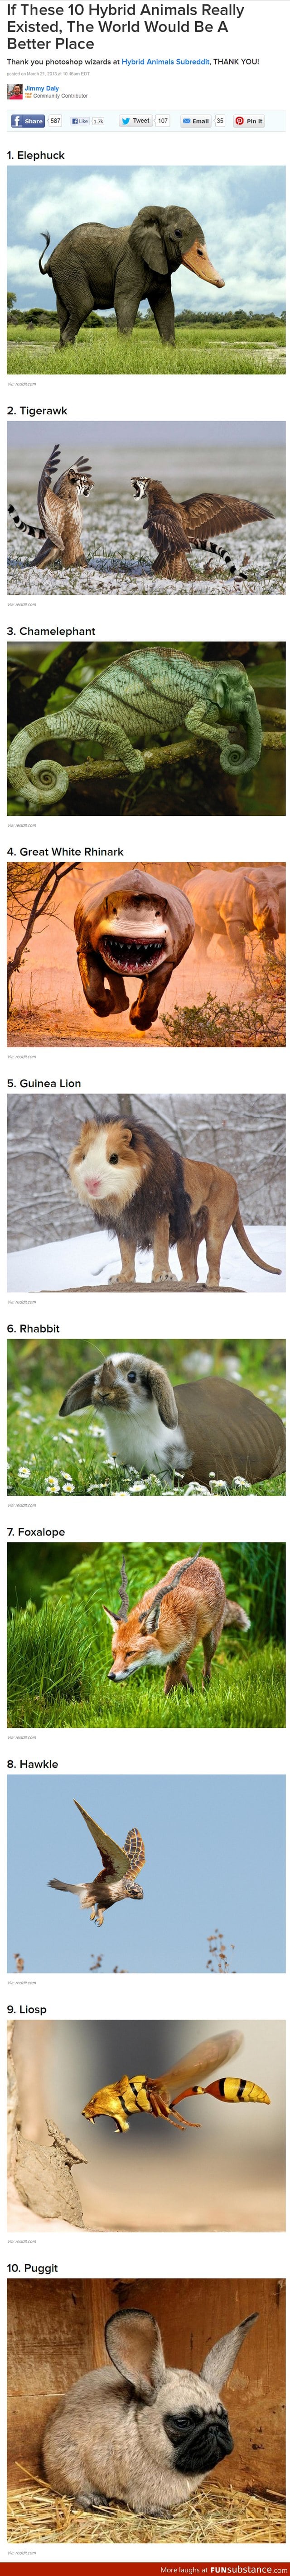 If these animals existed